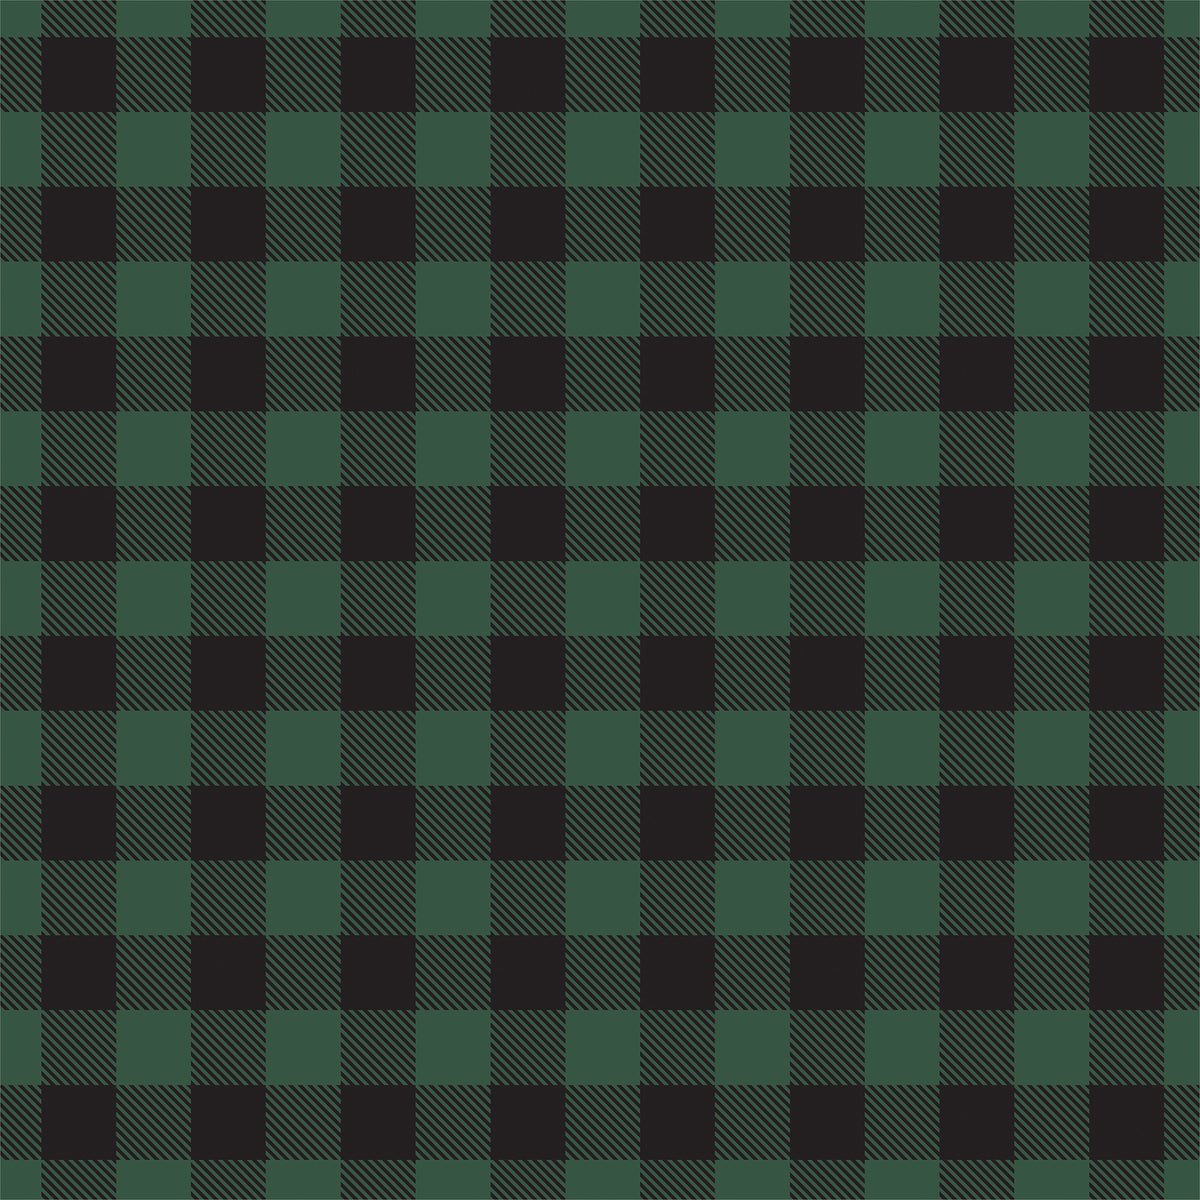 Reverse side - GREEN Buffalo Plaid 12x12 double-sided cardstock from Carta Bella